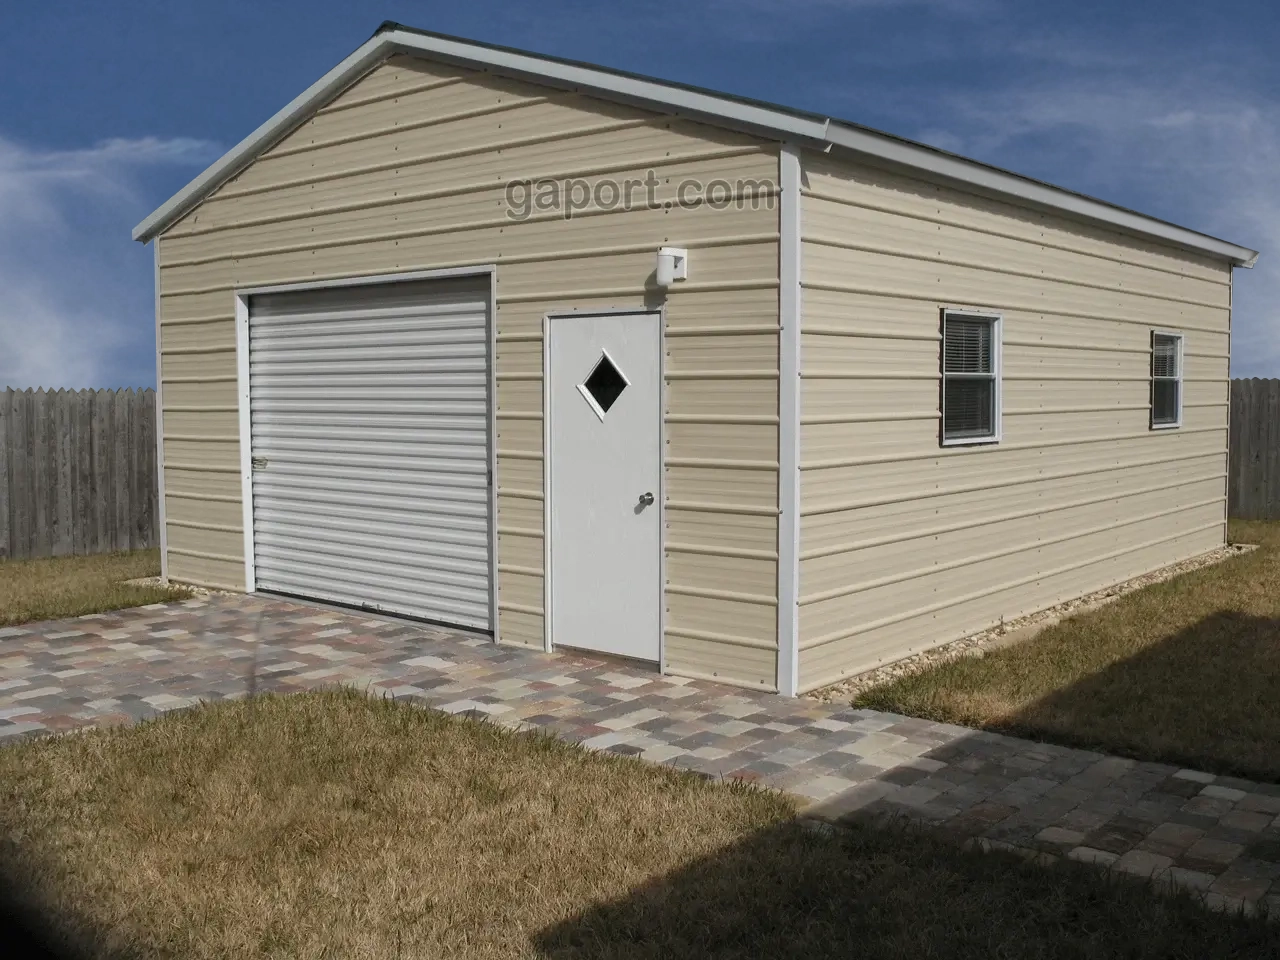 Learn more about this installed metal structure with garage door.